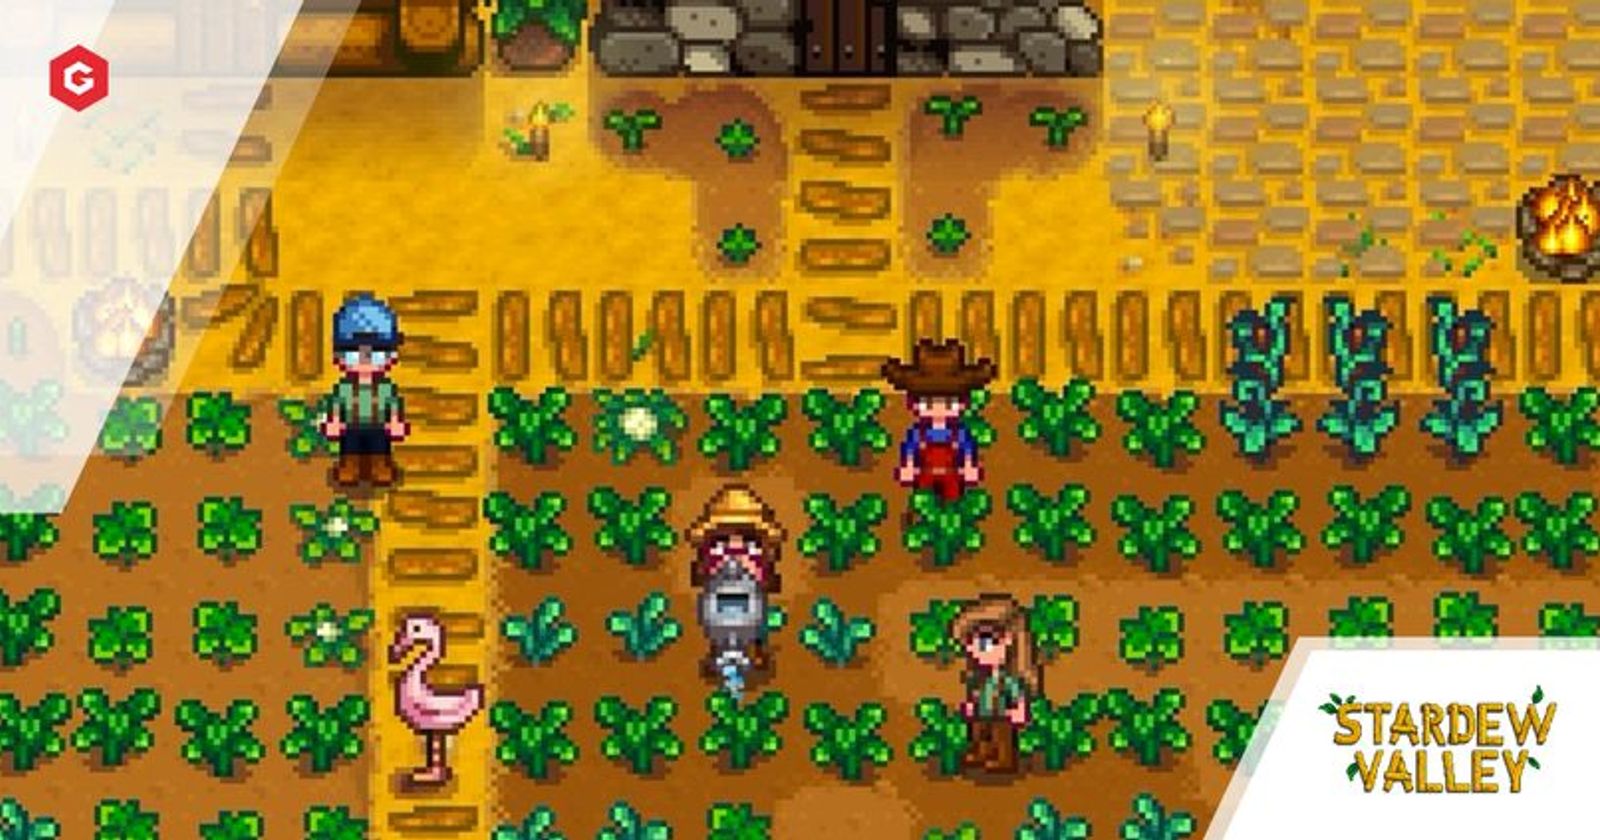 Stardew Valley Co-Op Multiplayer: Start A Farm With Friends